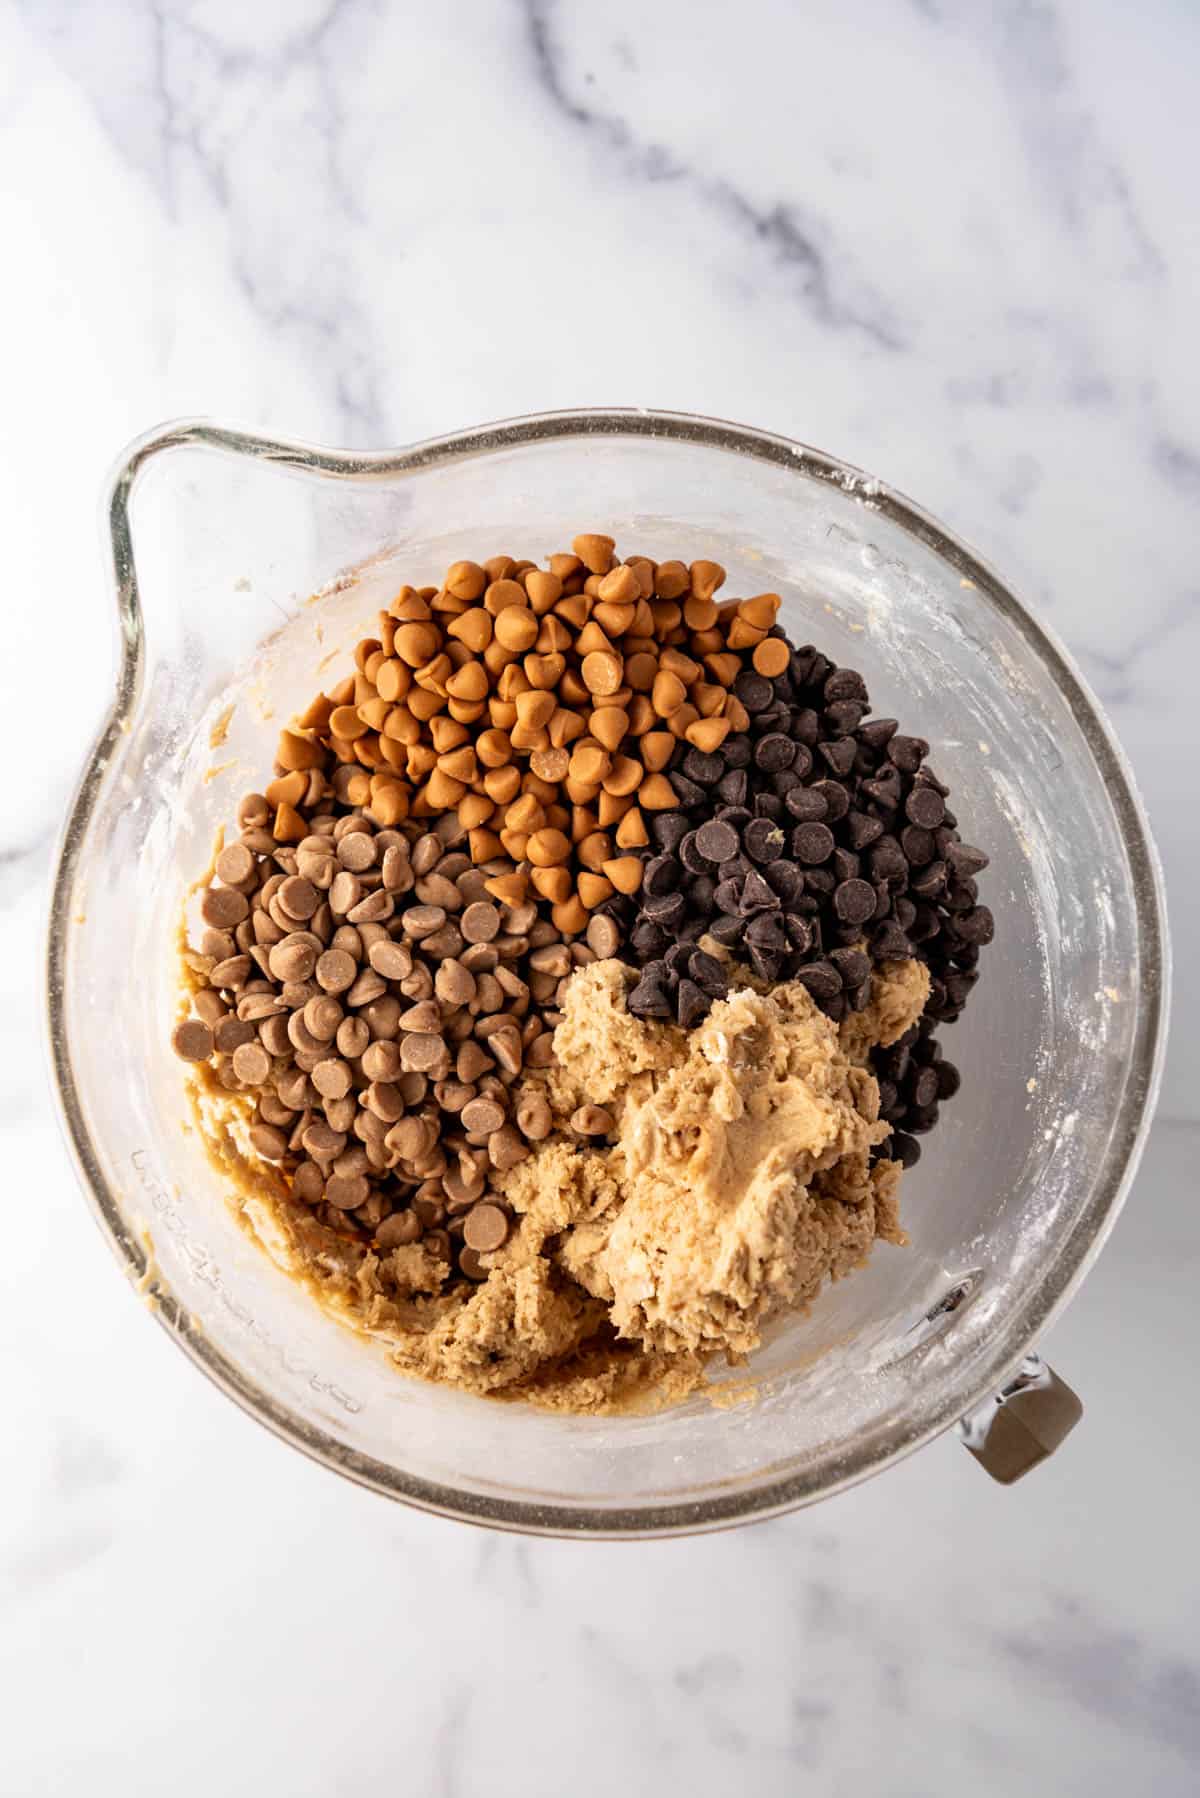 Adding chocolate chips, peanut butter chips, and butterscotch chips to peanut butter oatmeal cookie dough in a glass bowl.